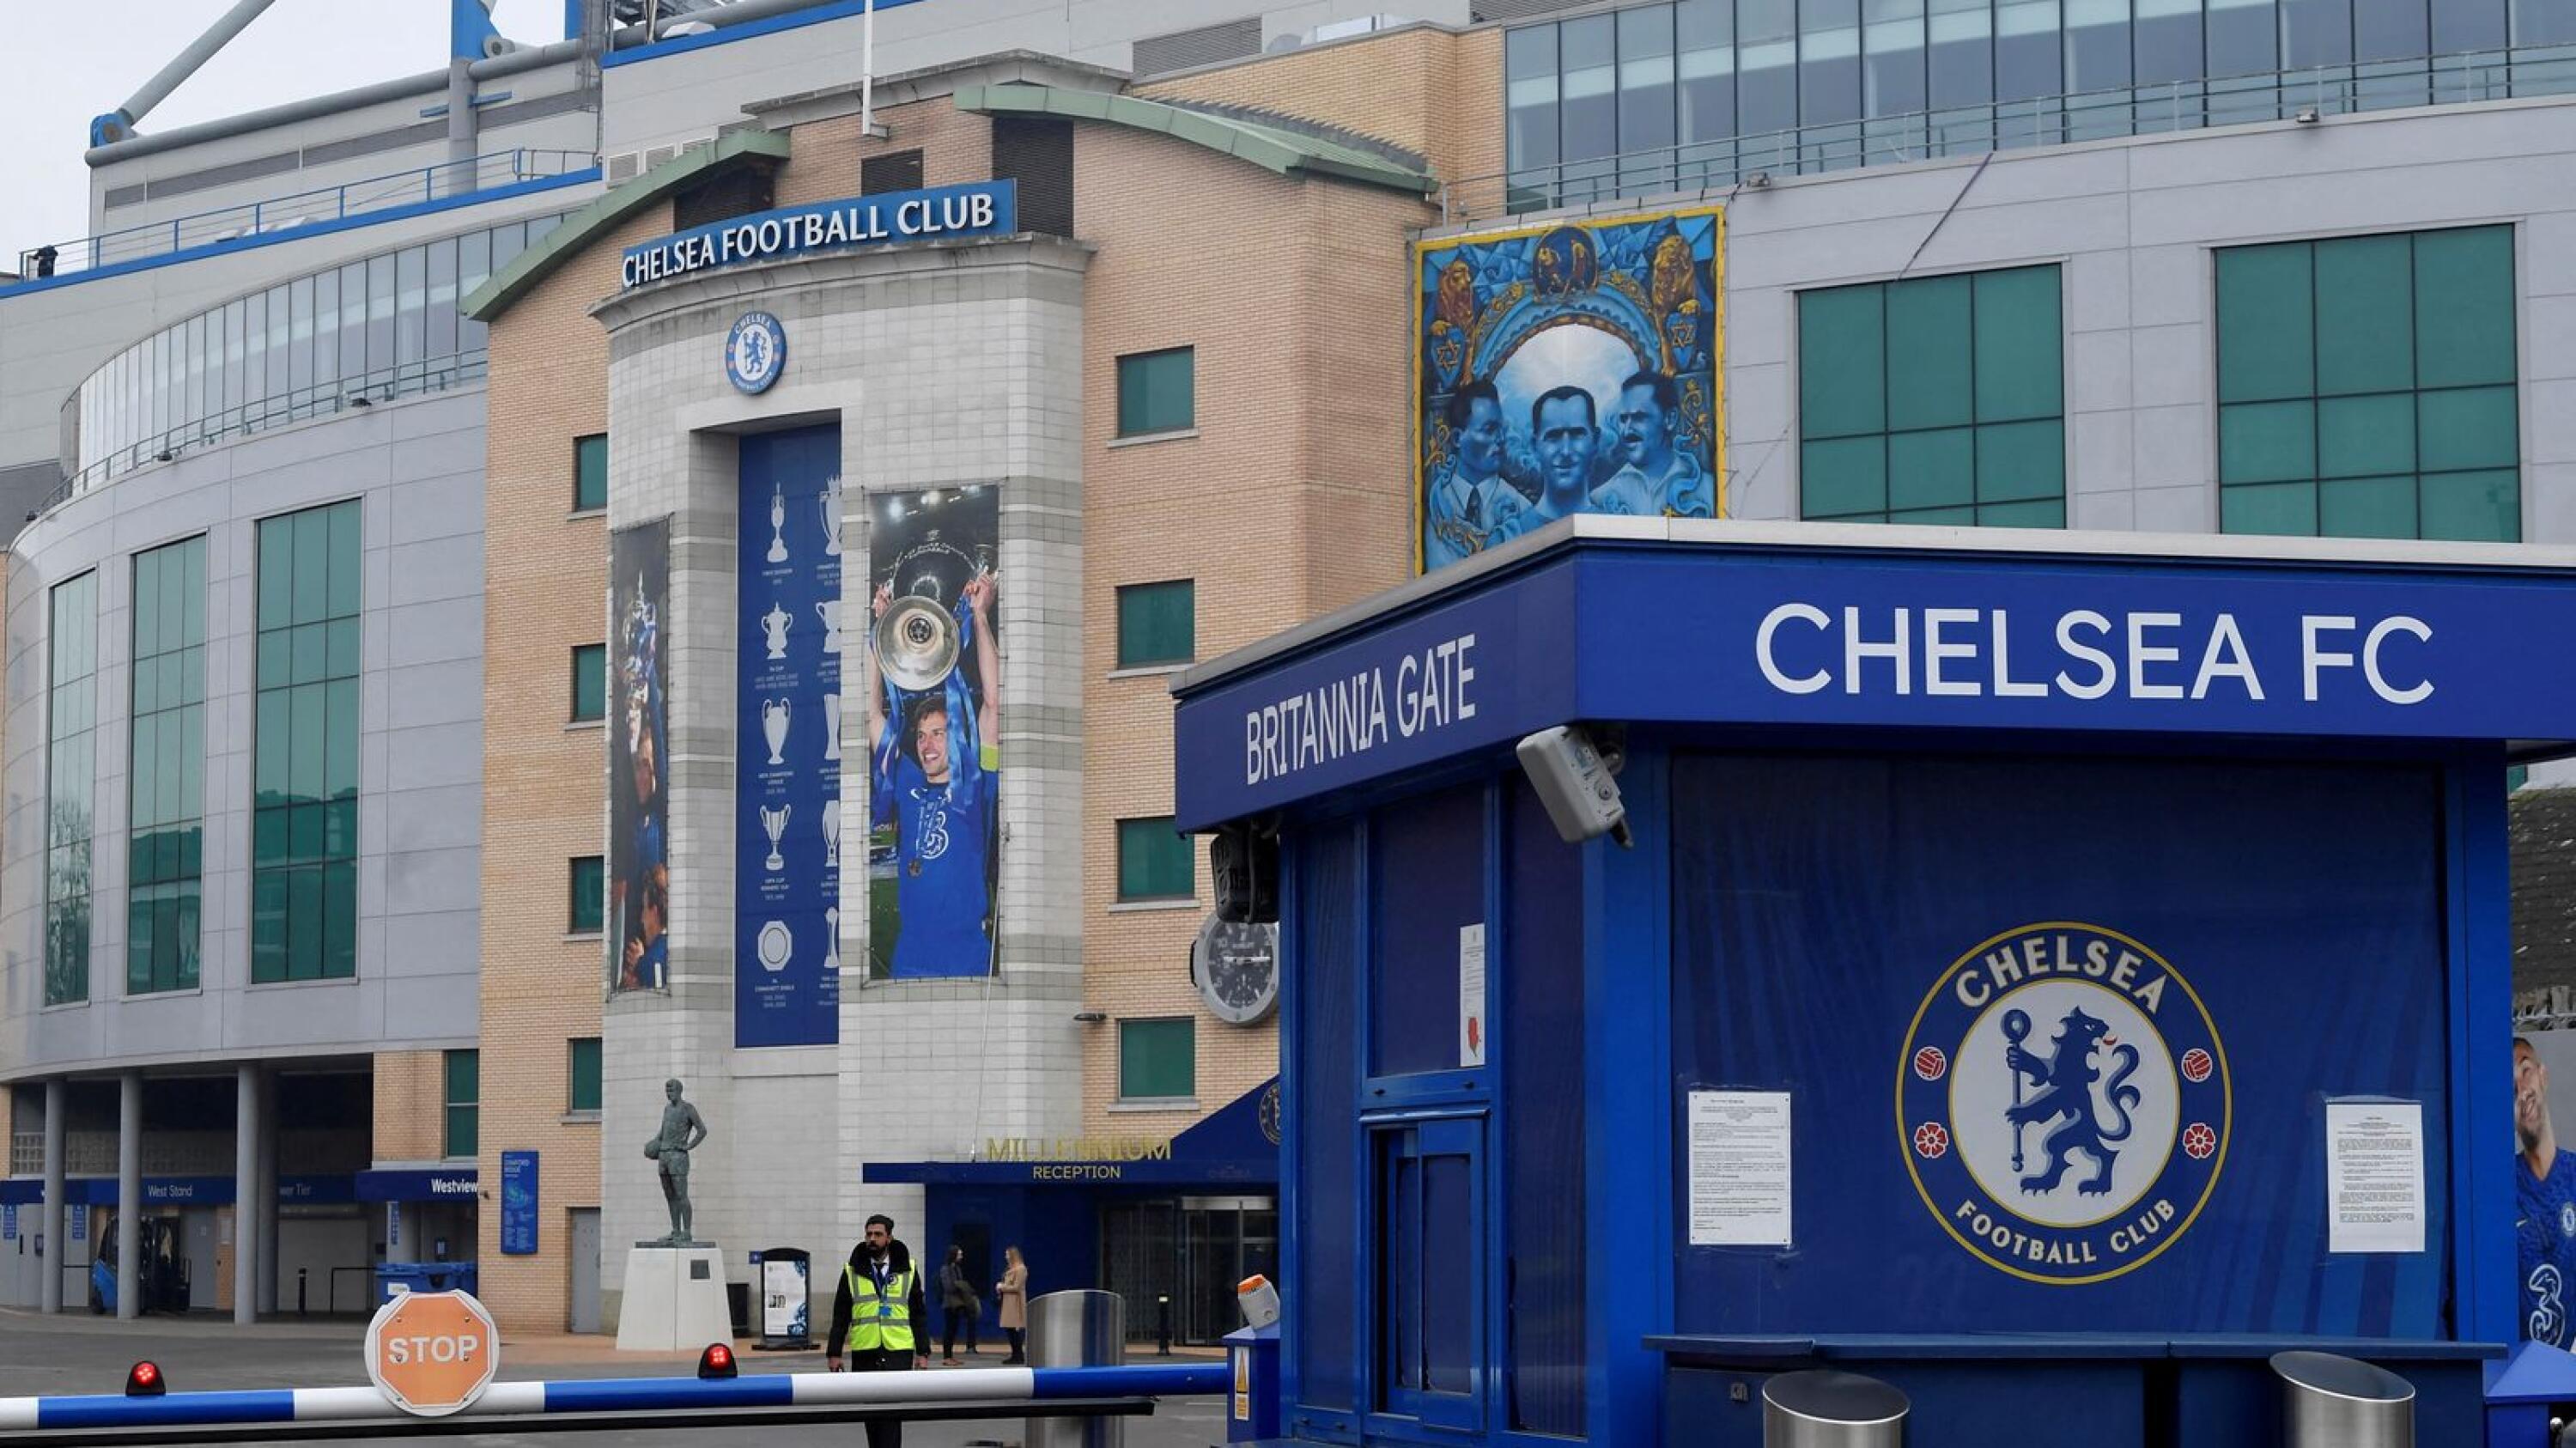 A security officer patrols at Stamford Bridge, the stadium for Chelsea Football Club, after Russian businessman Roman Abramovich said he would sell Chelsea, 19 years after buying it, amid growing pressure for oligarchs to be hit by sanctions after Russia's invasion of Ukraine